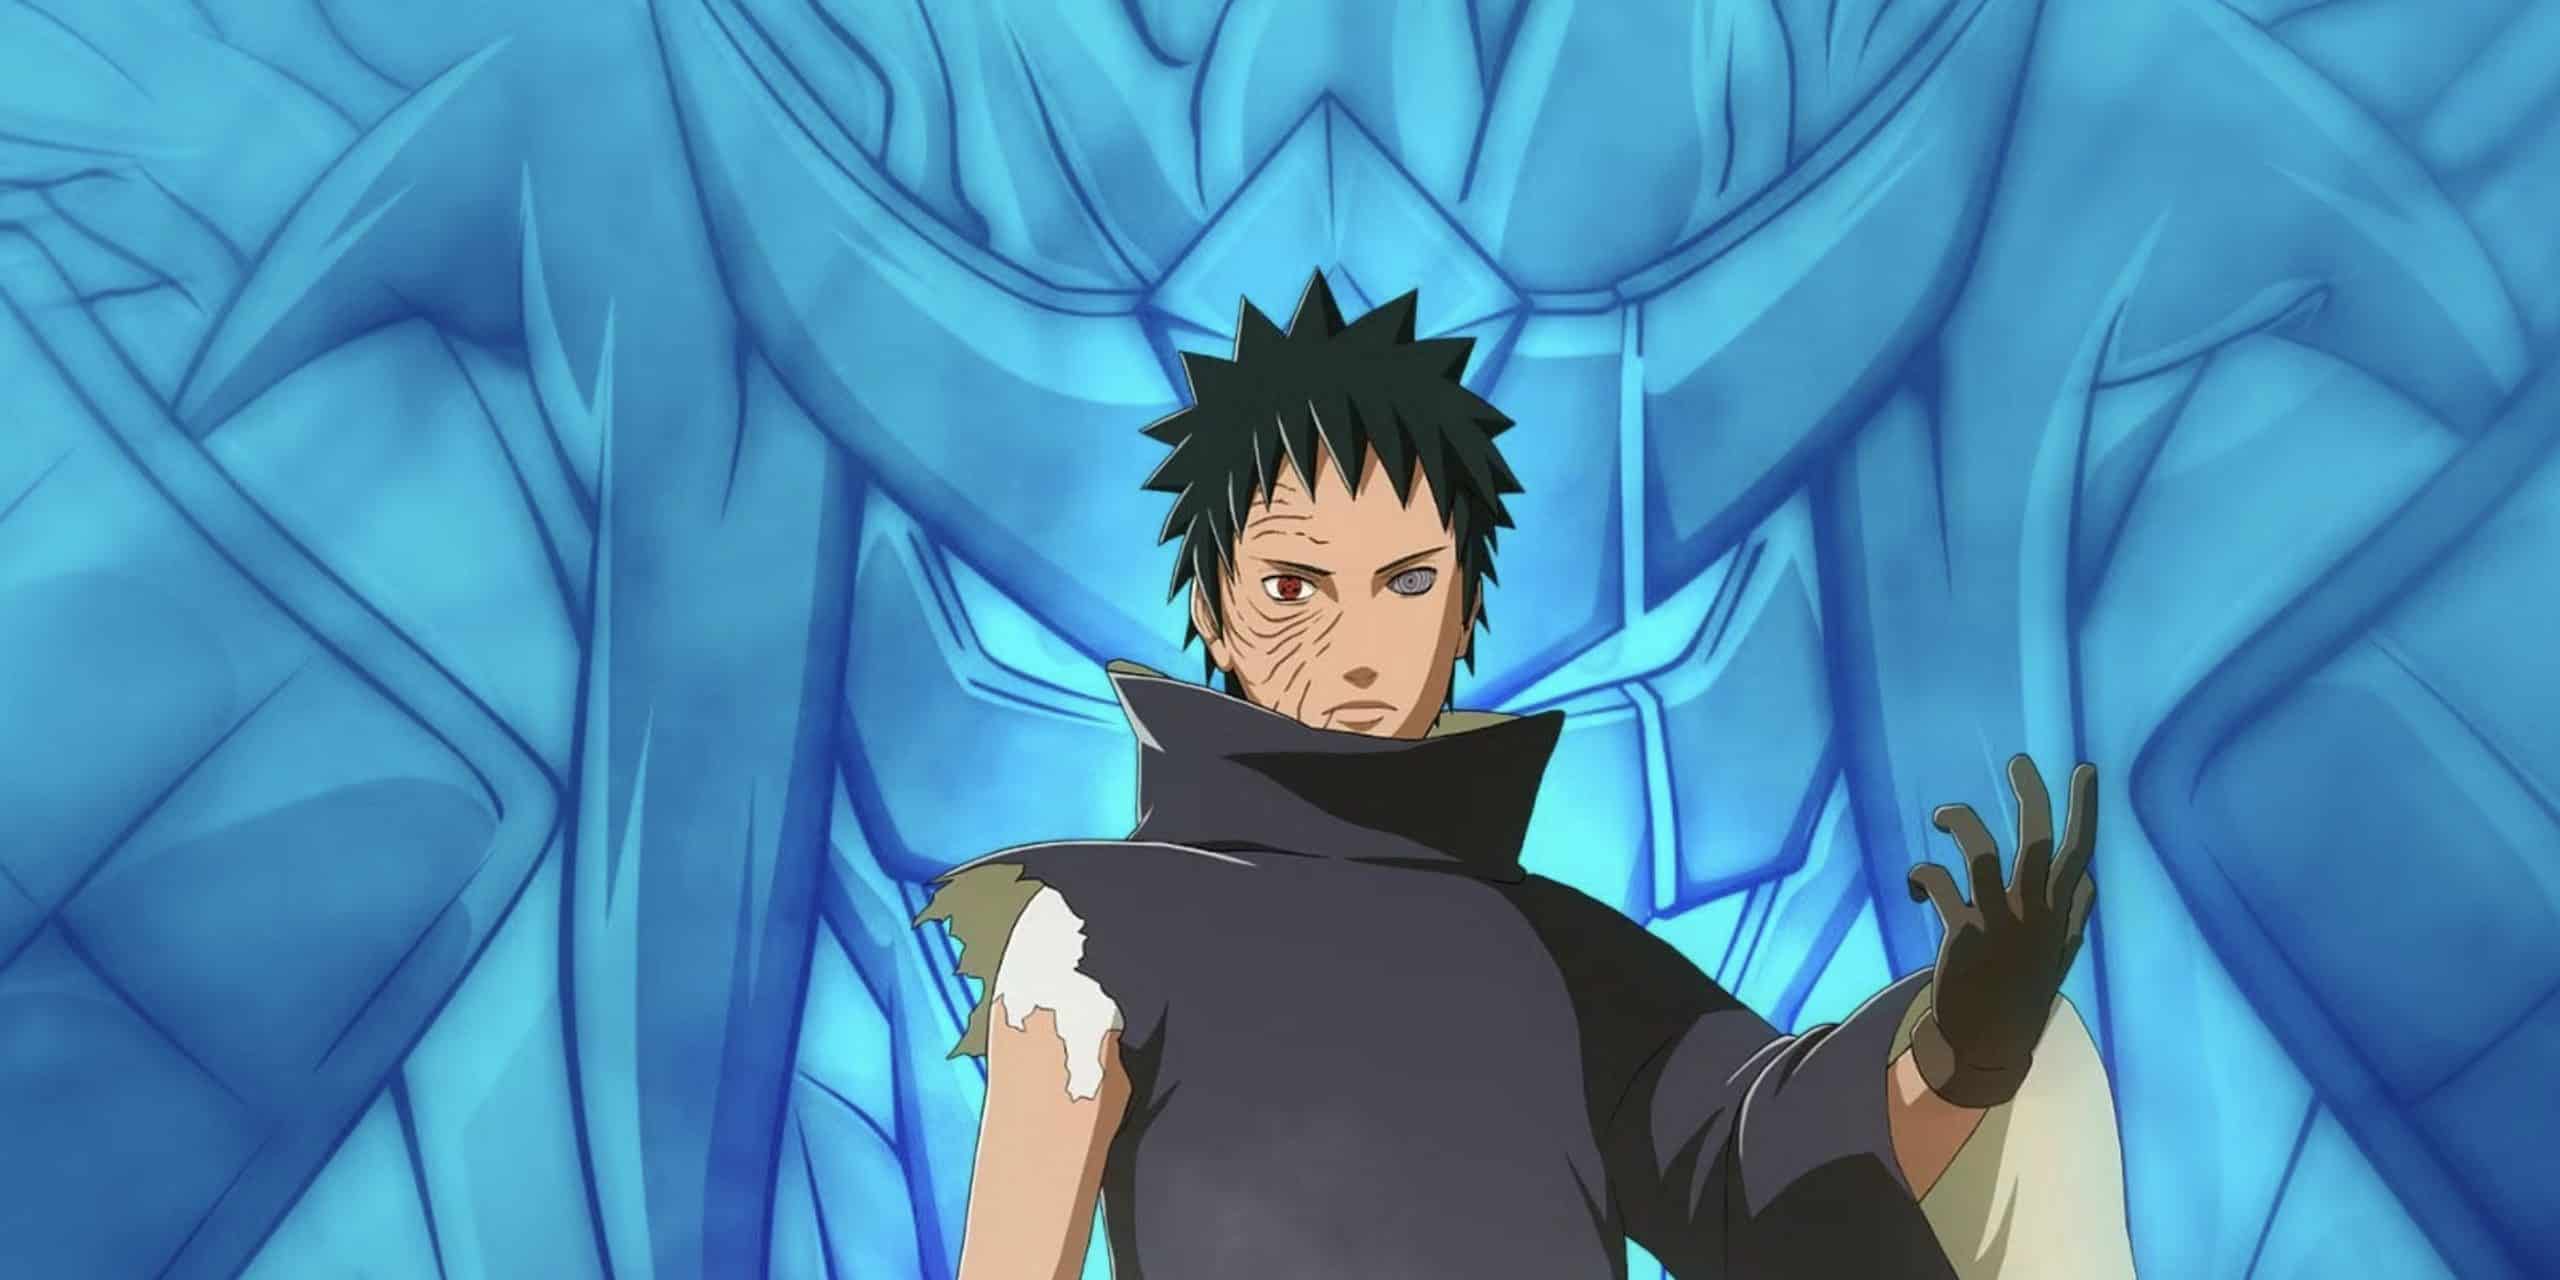 Who Is The Broken Hero In Naruto?